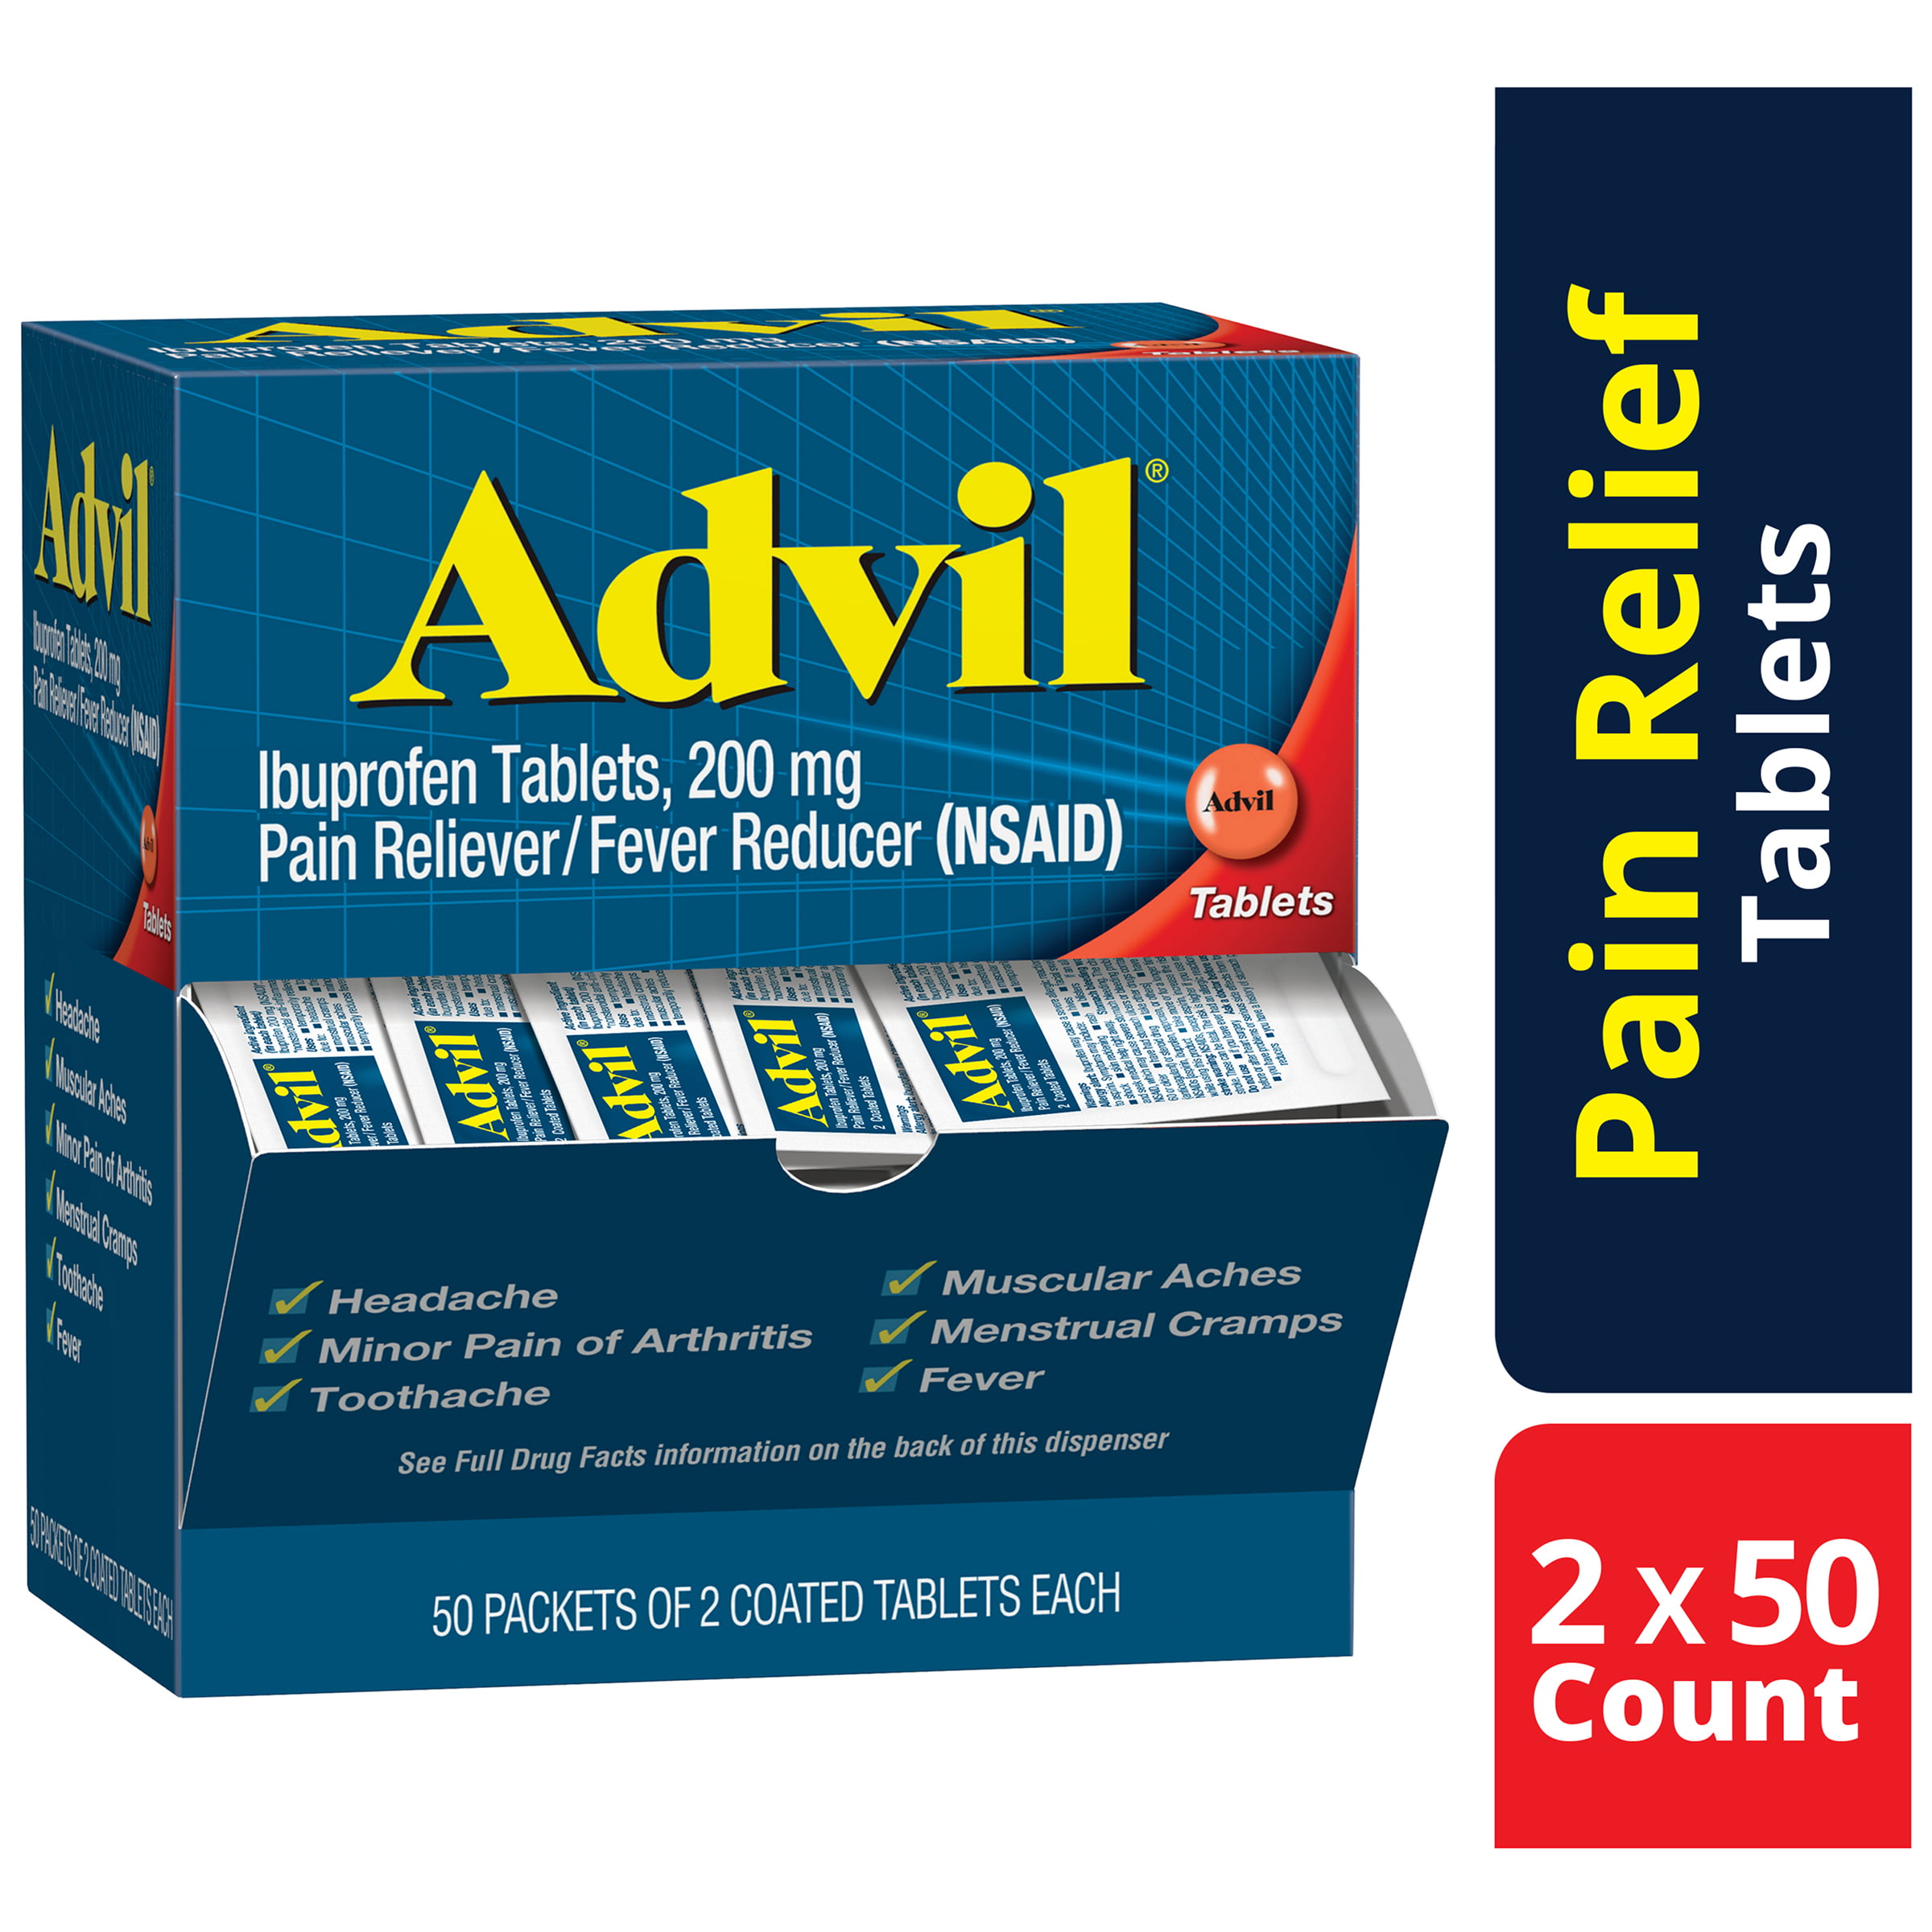 advil-pain-reliever-fever-reducer-coated-tablet-refill-2-by-50-ct